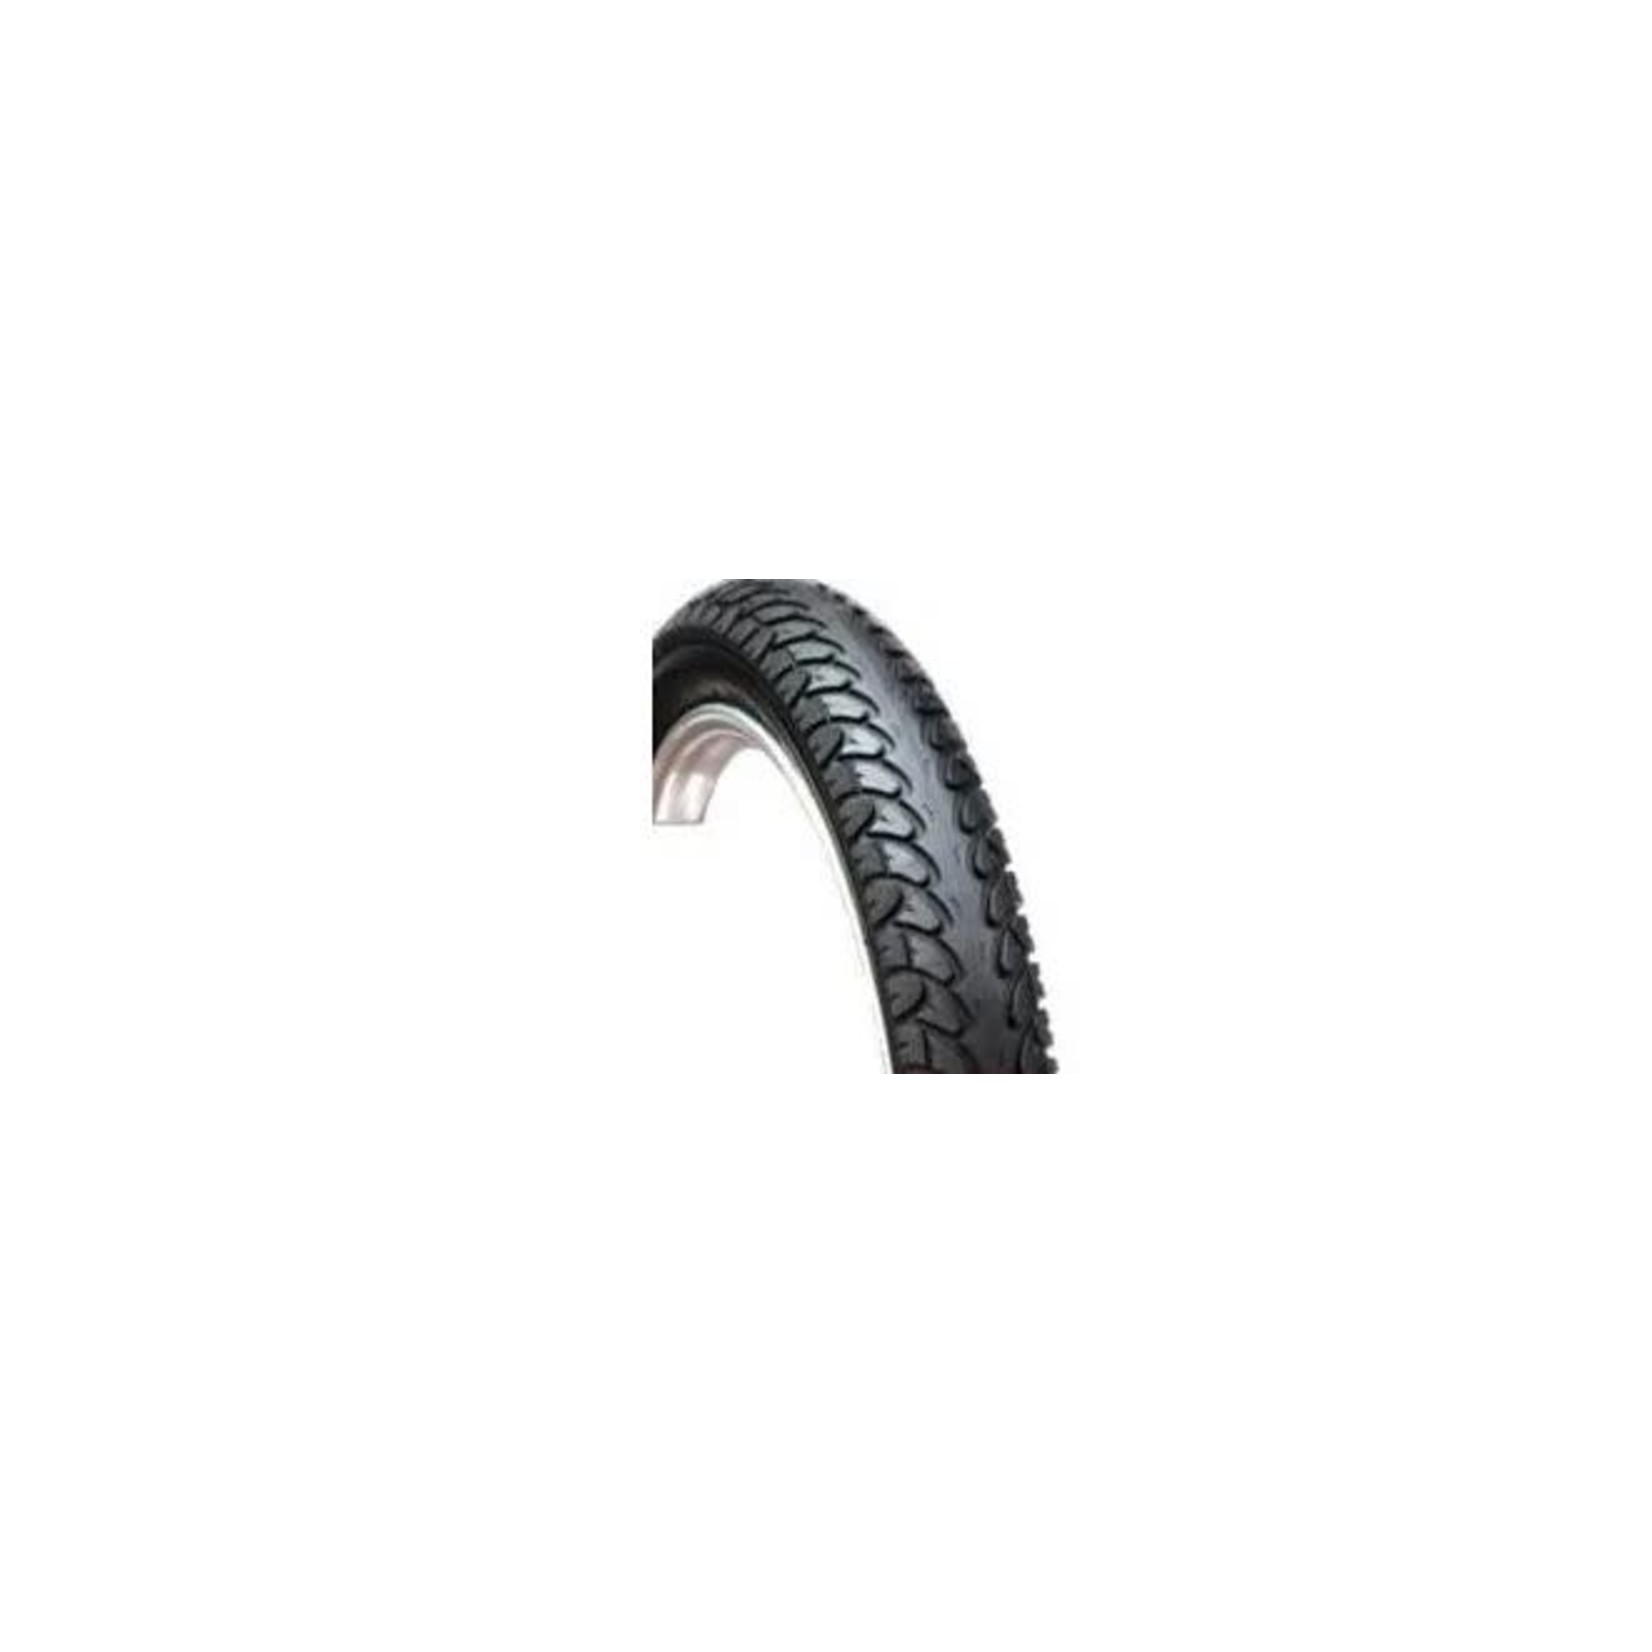 Duro Duro Bicycle Tyre - 16 X 2.125 - Quality Vee Rubber product - Black - Pair